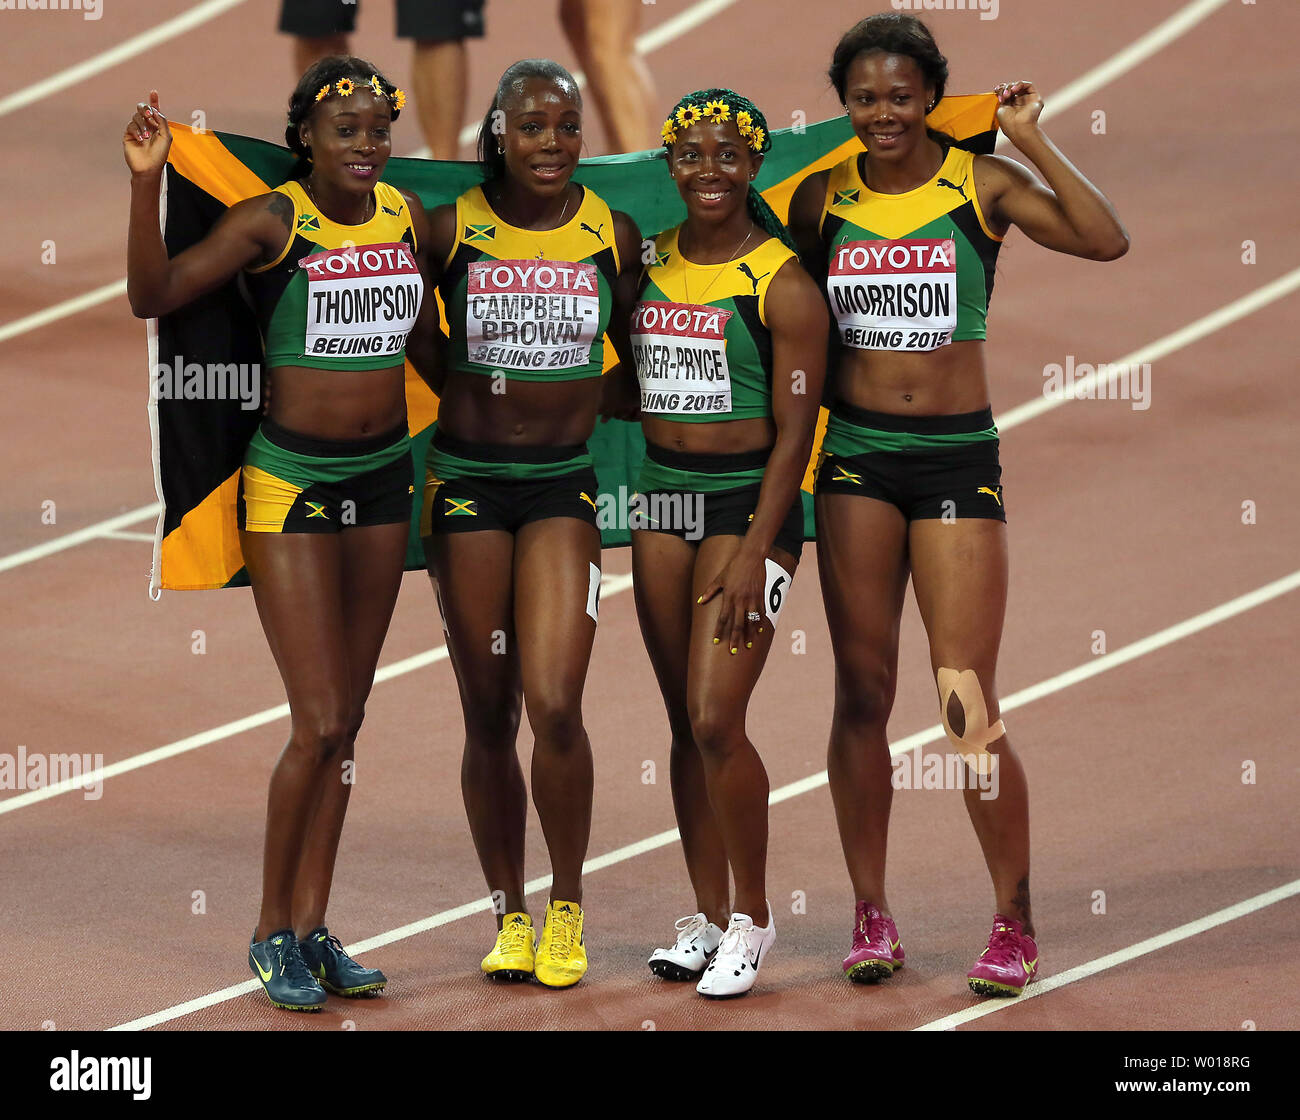 (L-R) Jamaica's Elaine Thompson, Veronica Brown, Shelly-Ann Fraser-Pryce and Natasha Morrison pose with the Jamaican flag after winning the 4x100 meters women's relay final at the IAAF World Championships being hosted by Beijing on August 29, 2015.  Jamaica won with a time of 41.07 seconds, followed by USA (41.68) and Trinidad and Tobago (42.03) in third.     Photo by Stephen Shaver/UPI Stock Photo